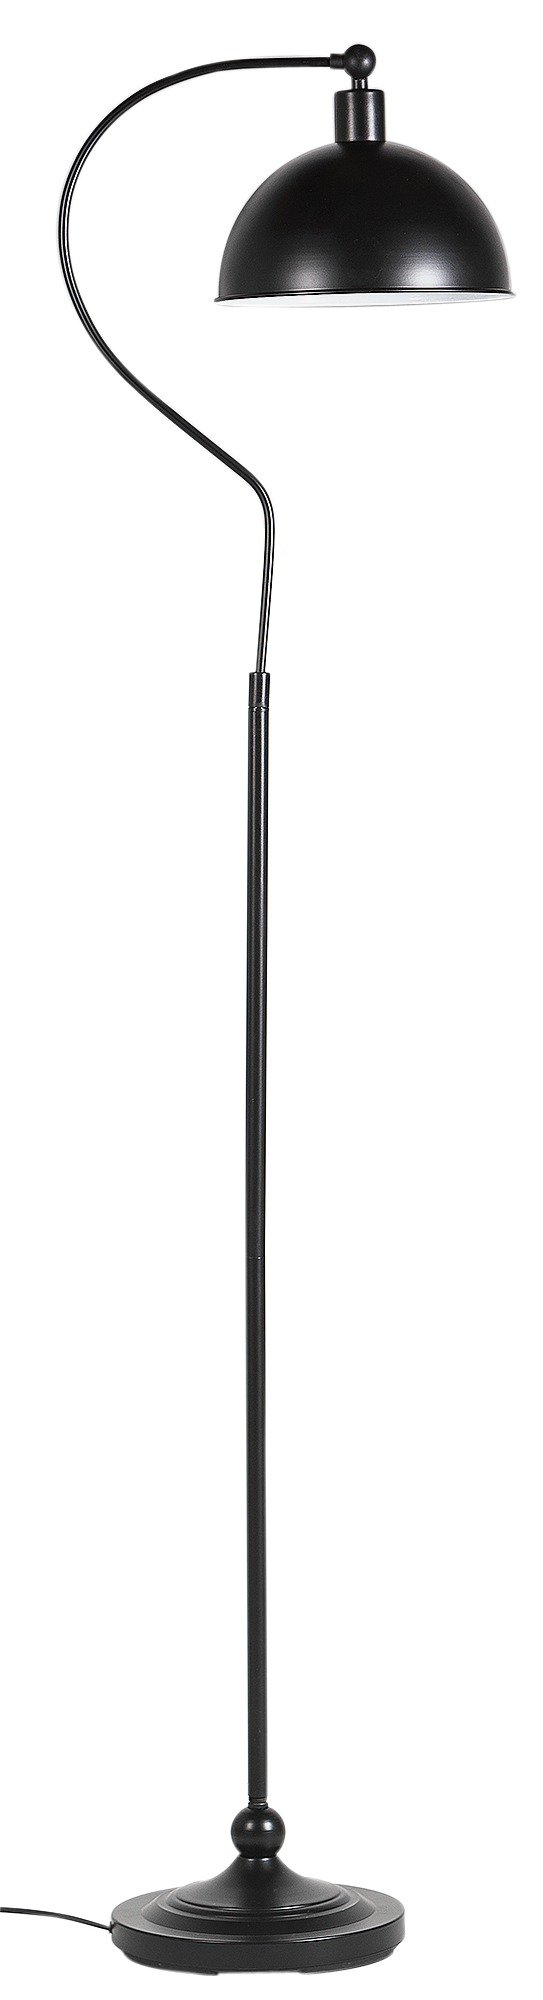 Argos Home Coral Curved Floor Lamp - Black